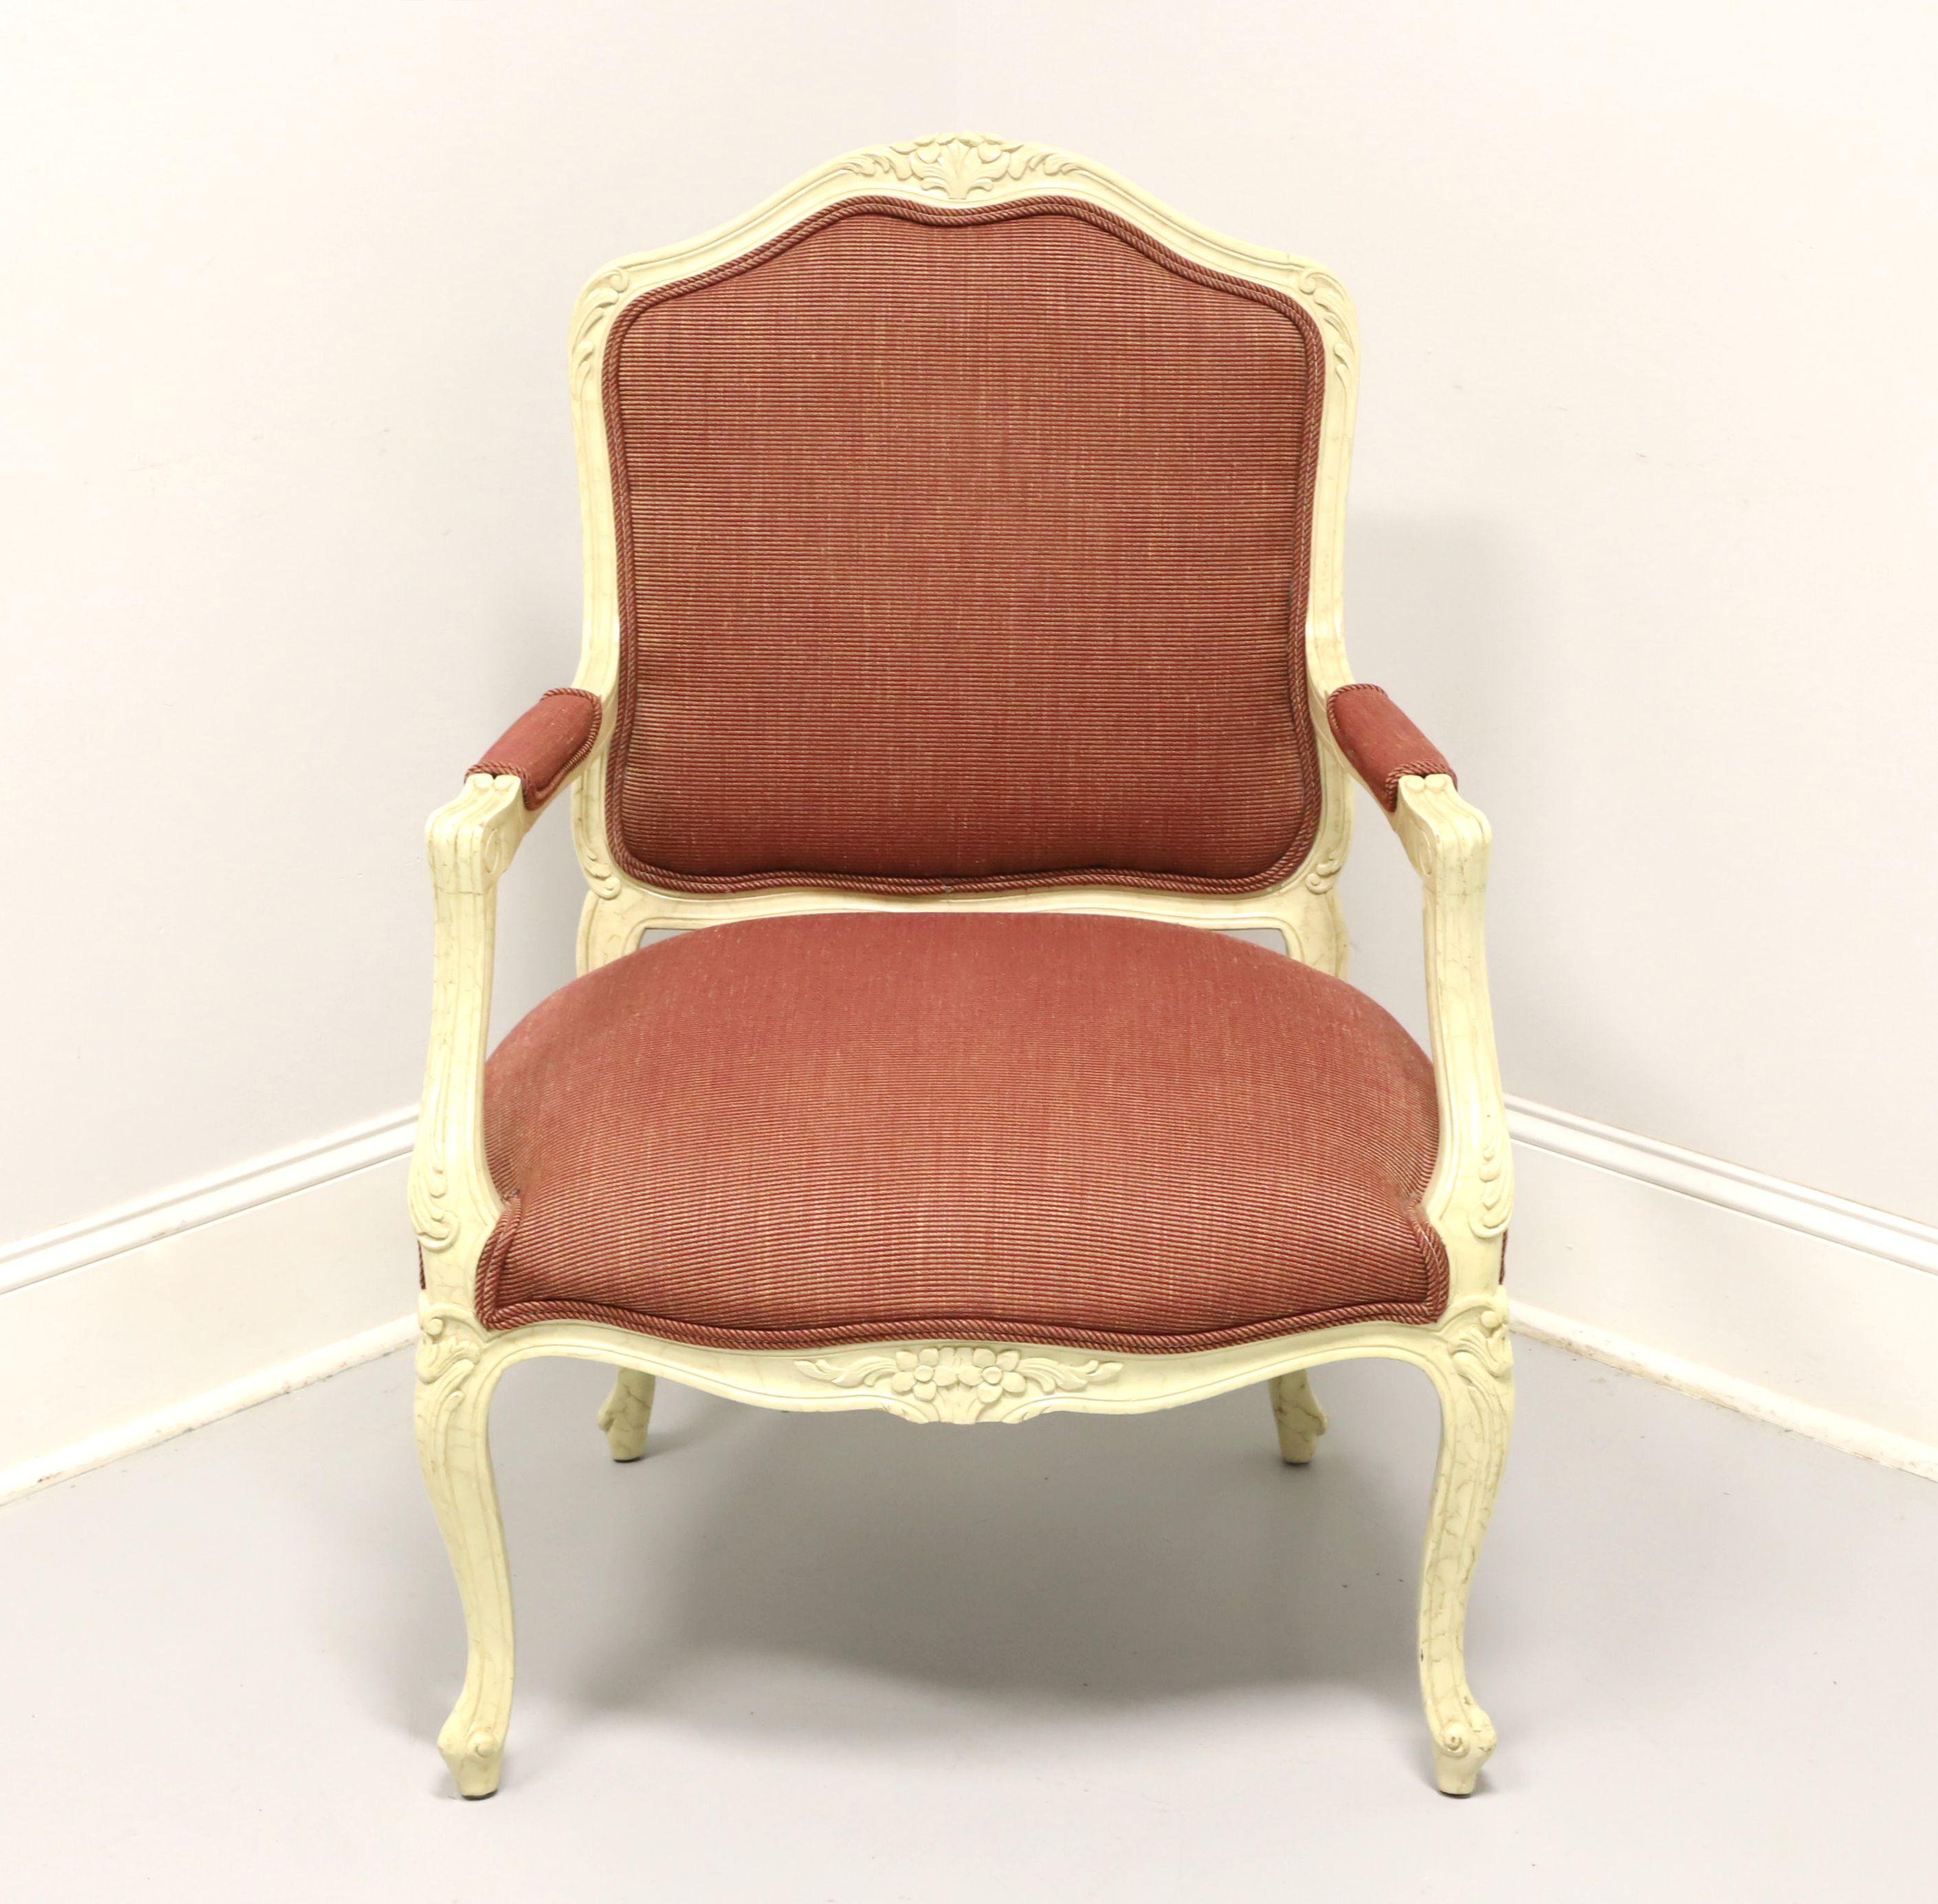 A French Louis XV style upholstered armchair, unbranded, similar quality to Drexel Heritage or Hickory Chair. Hardwood frame painted a marbleized cream color, burgundy color fabric upholstery, partially upholstered arms with carved supports, carved